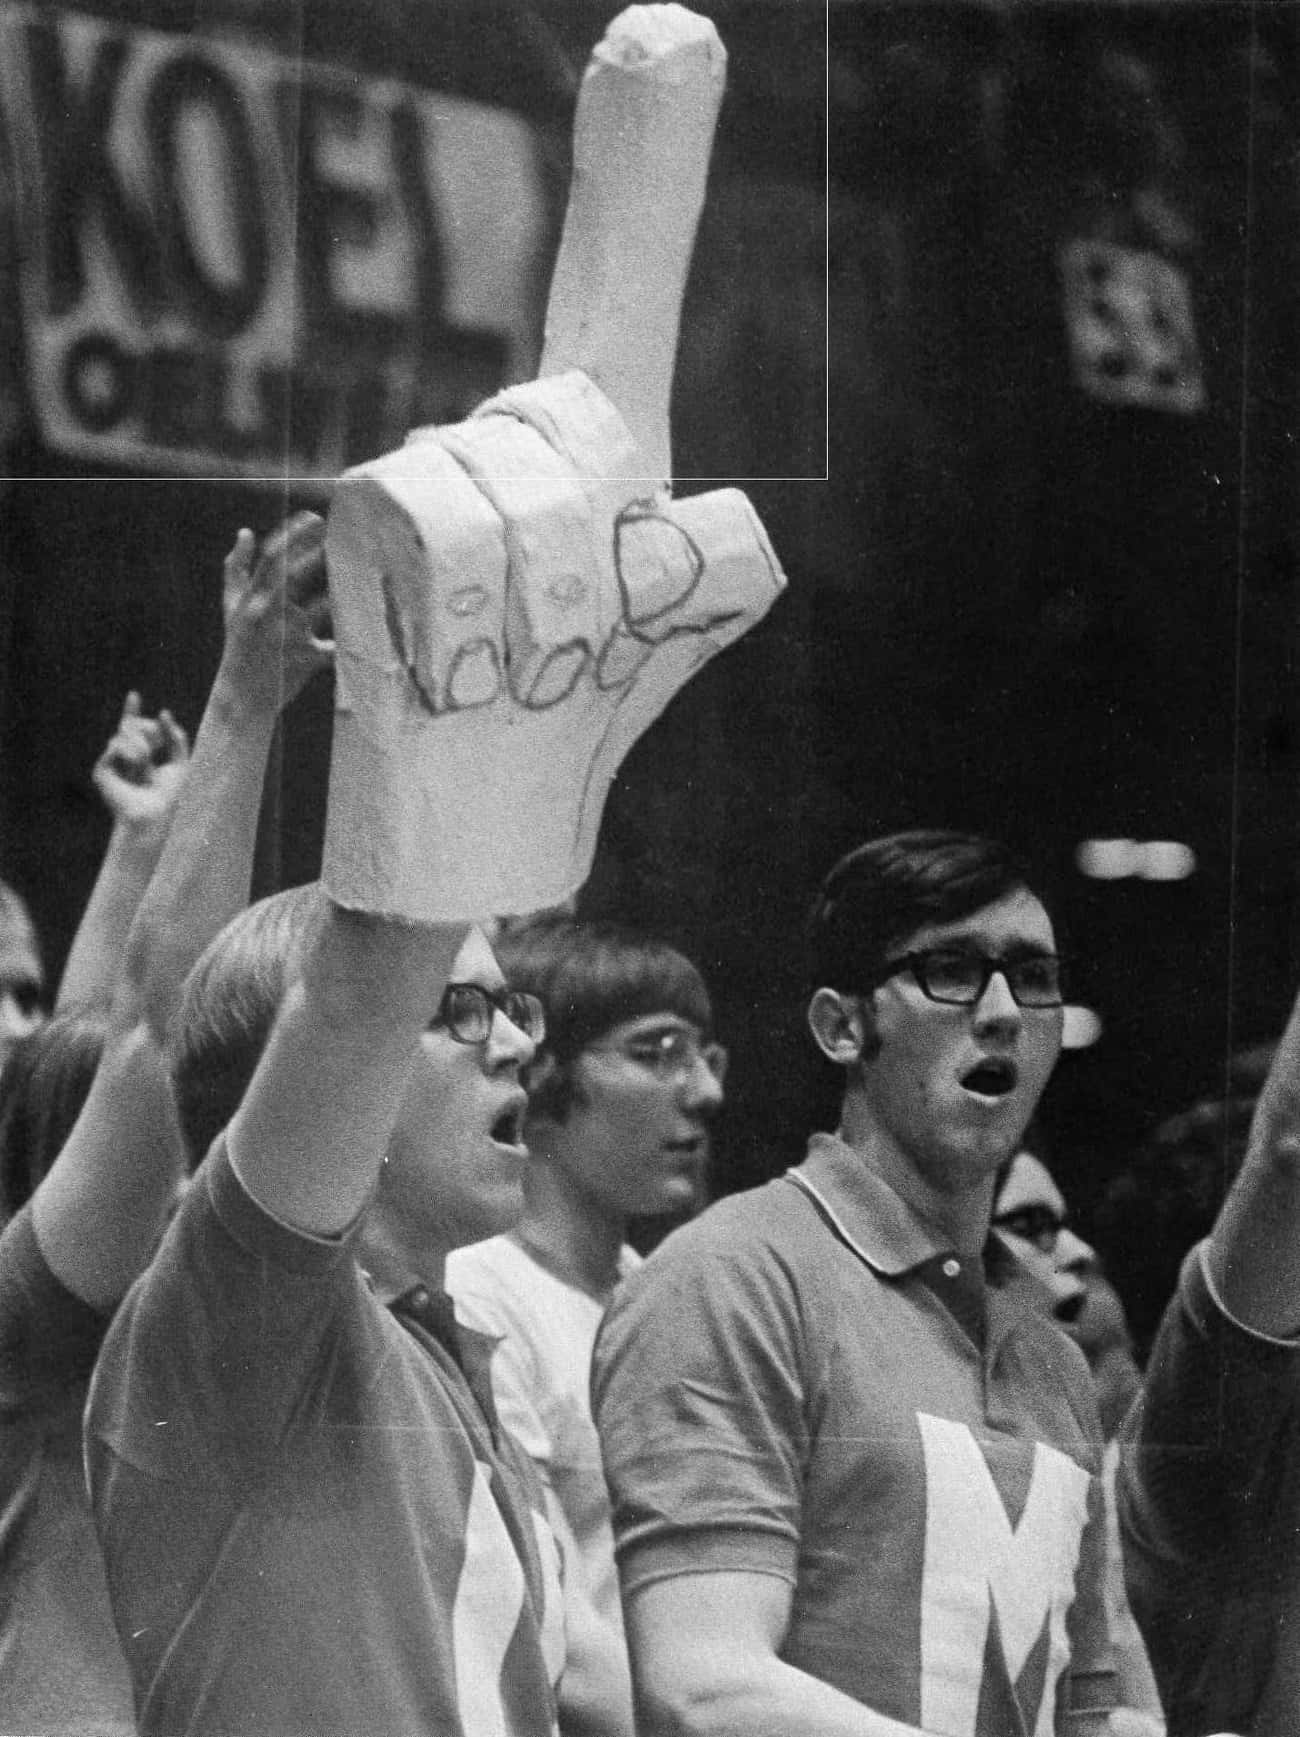 The Very First Foam Finger, 1971